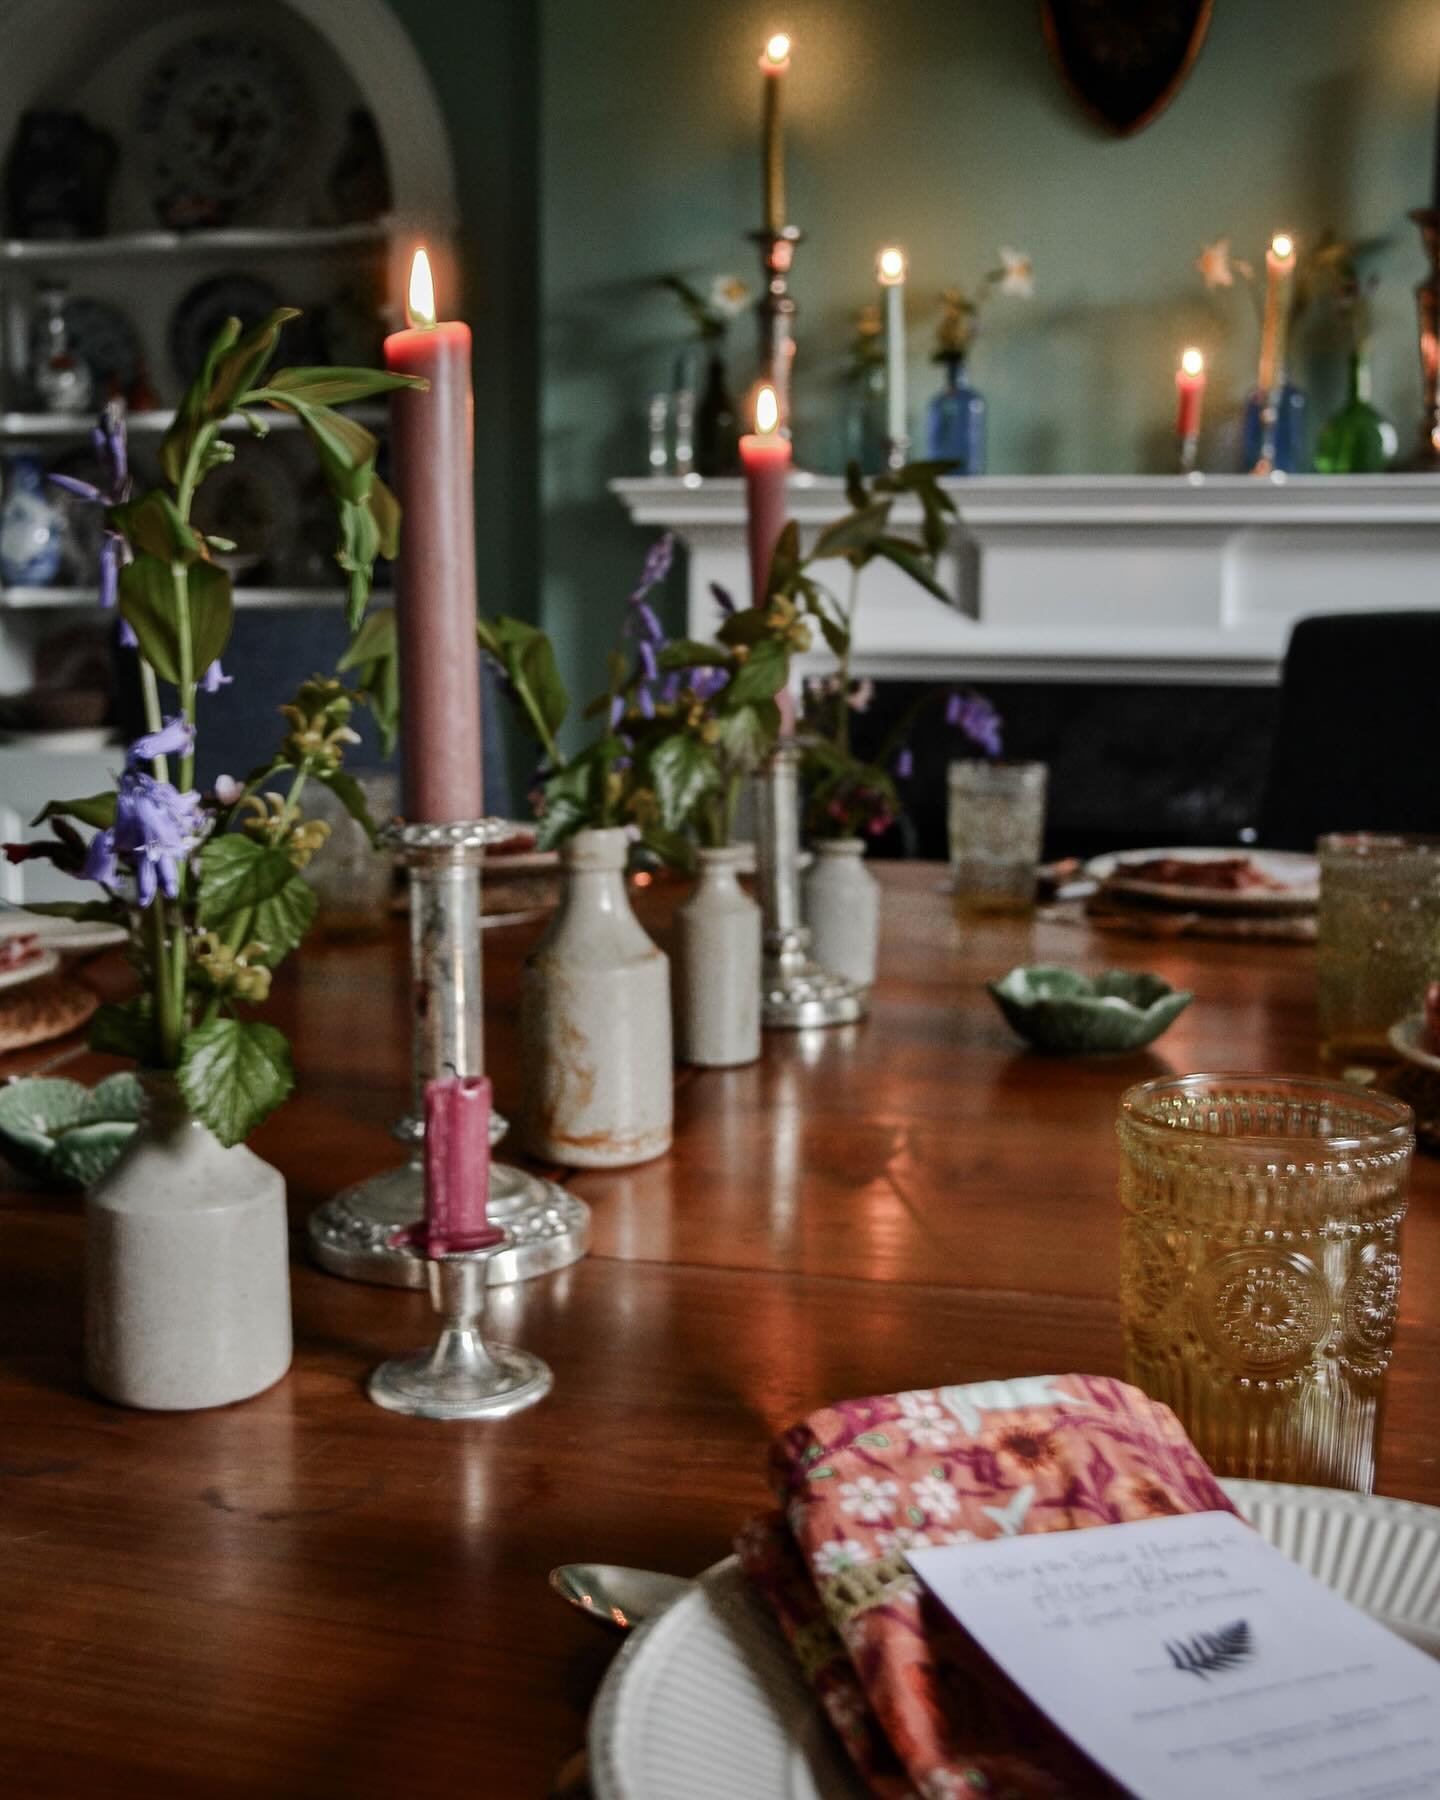 Taste the Highlands 🦌🍽️

Still reminiscing about the lovely evening spent hosting @slowadventure last week at our home! 🌿

We loved showcasing our Scottish Wild Venison Charcuterie at a meet-the-producer Supperclub 🍽️

For starters, we served roa